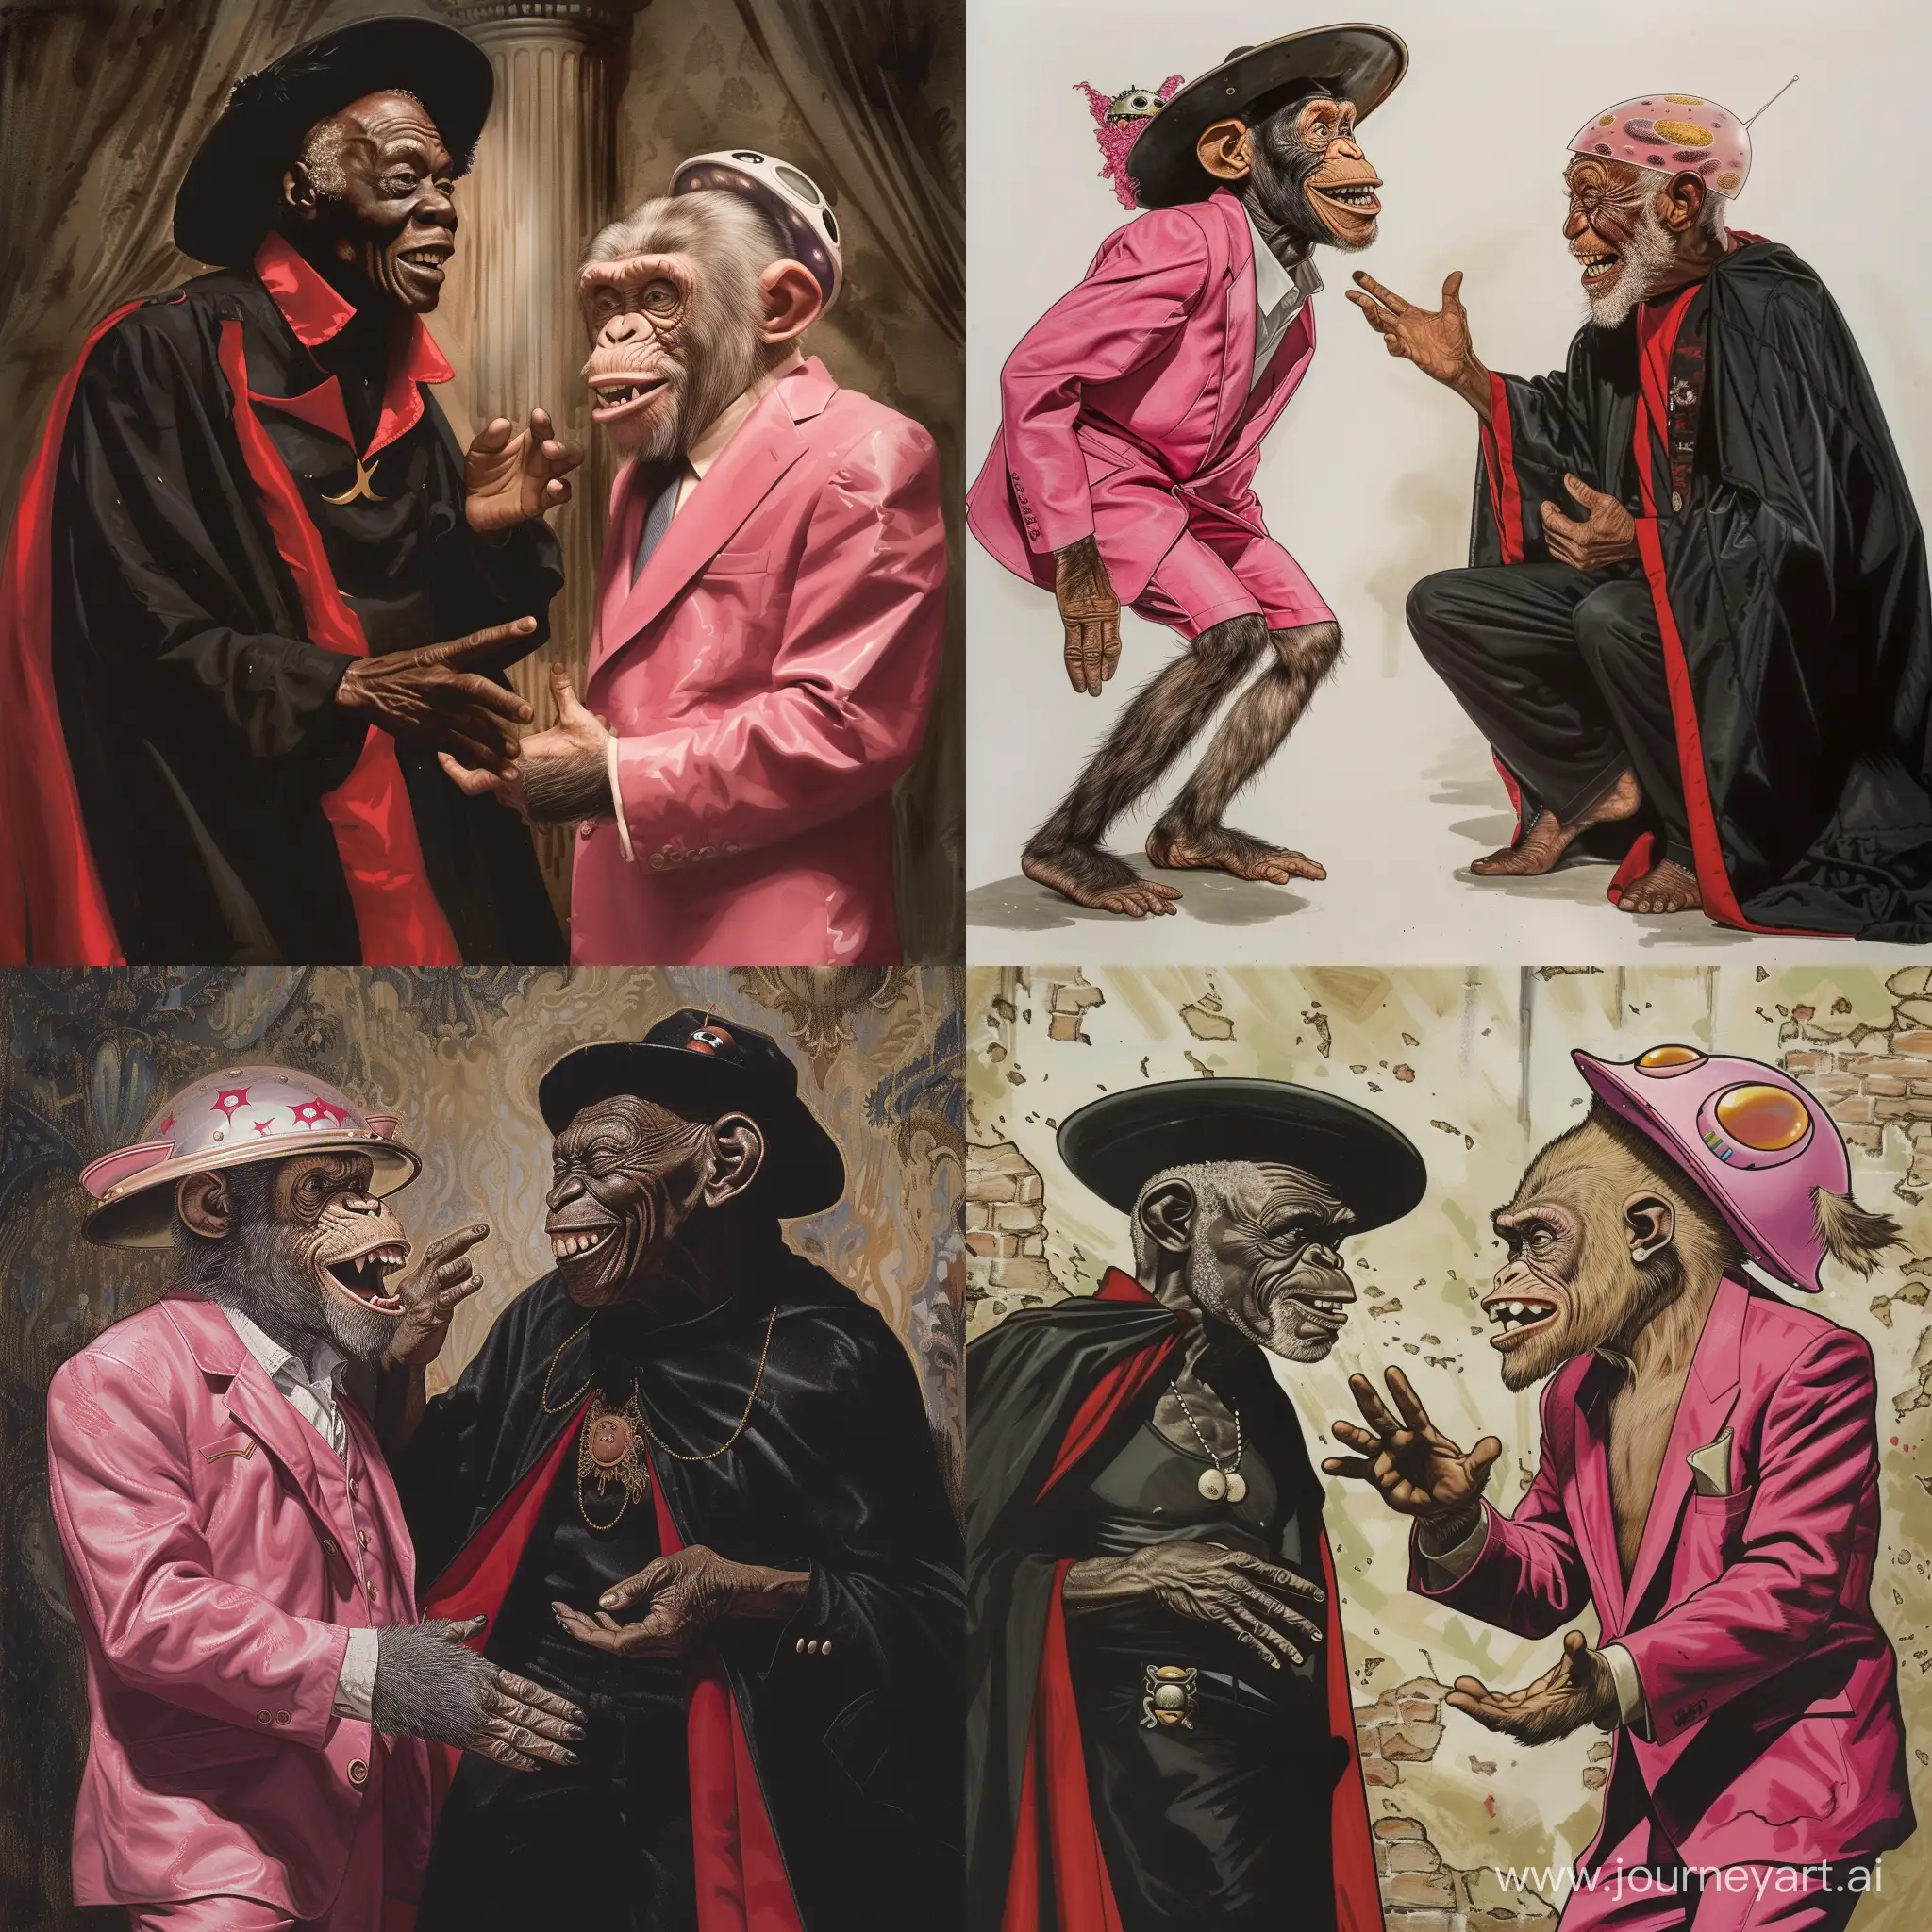 Elderly-Man-in-Black-and-Red-Cape-Engages-in-Animated-Debate-with-Ape-in-Pink-Suit-and-Alien-Hat-Andrew-Tate-Laughs